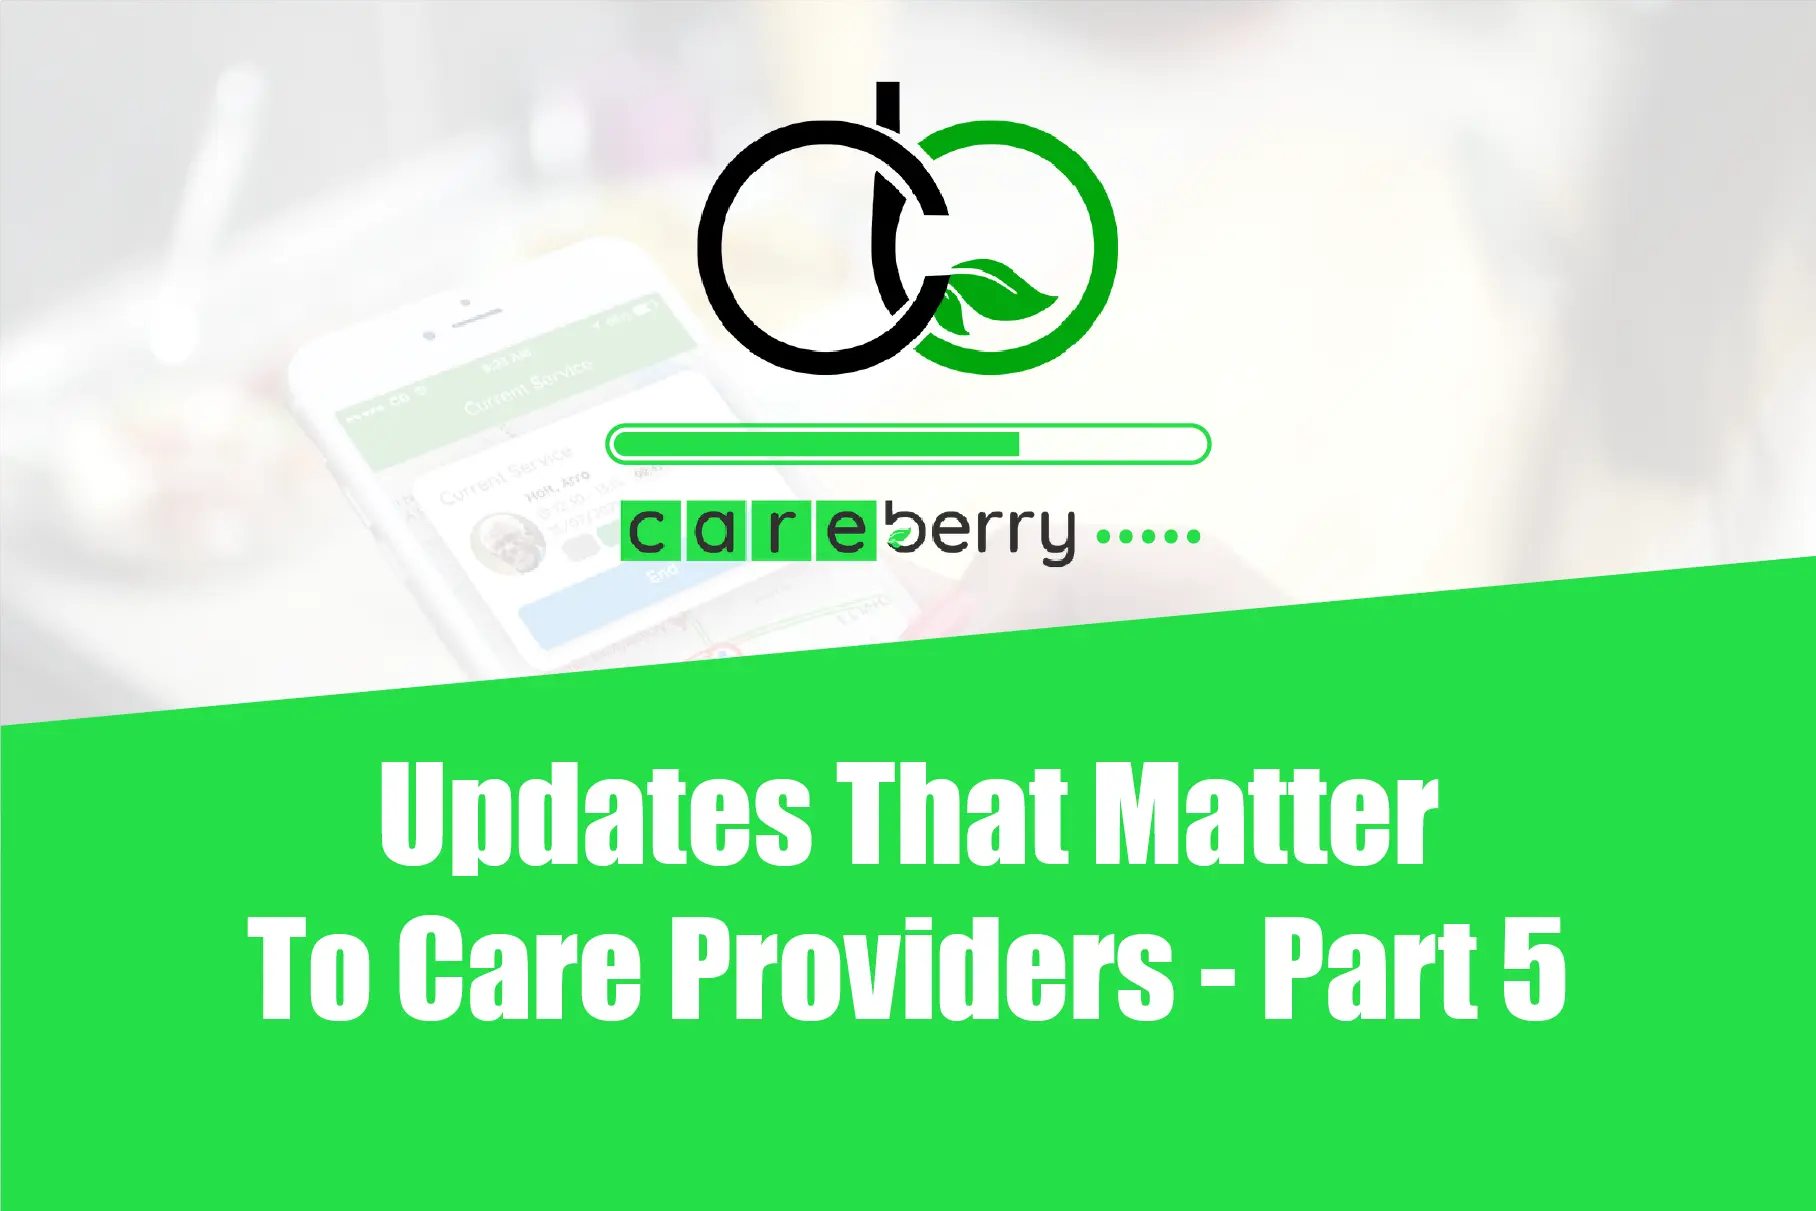 Updates That Matter to Care Providers - Part 5